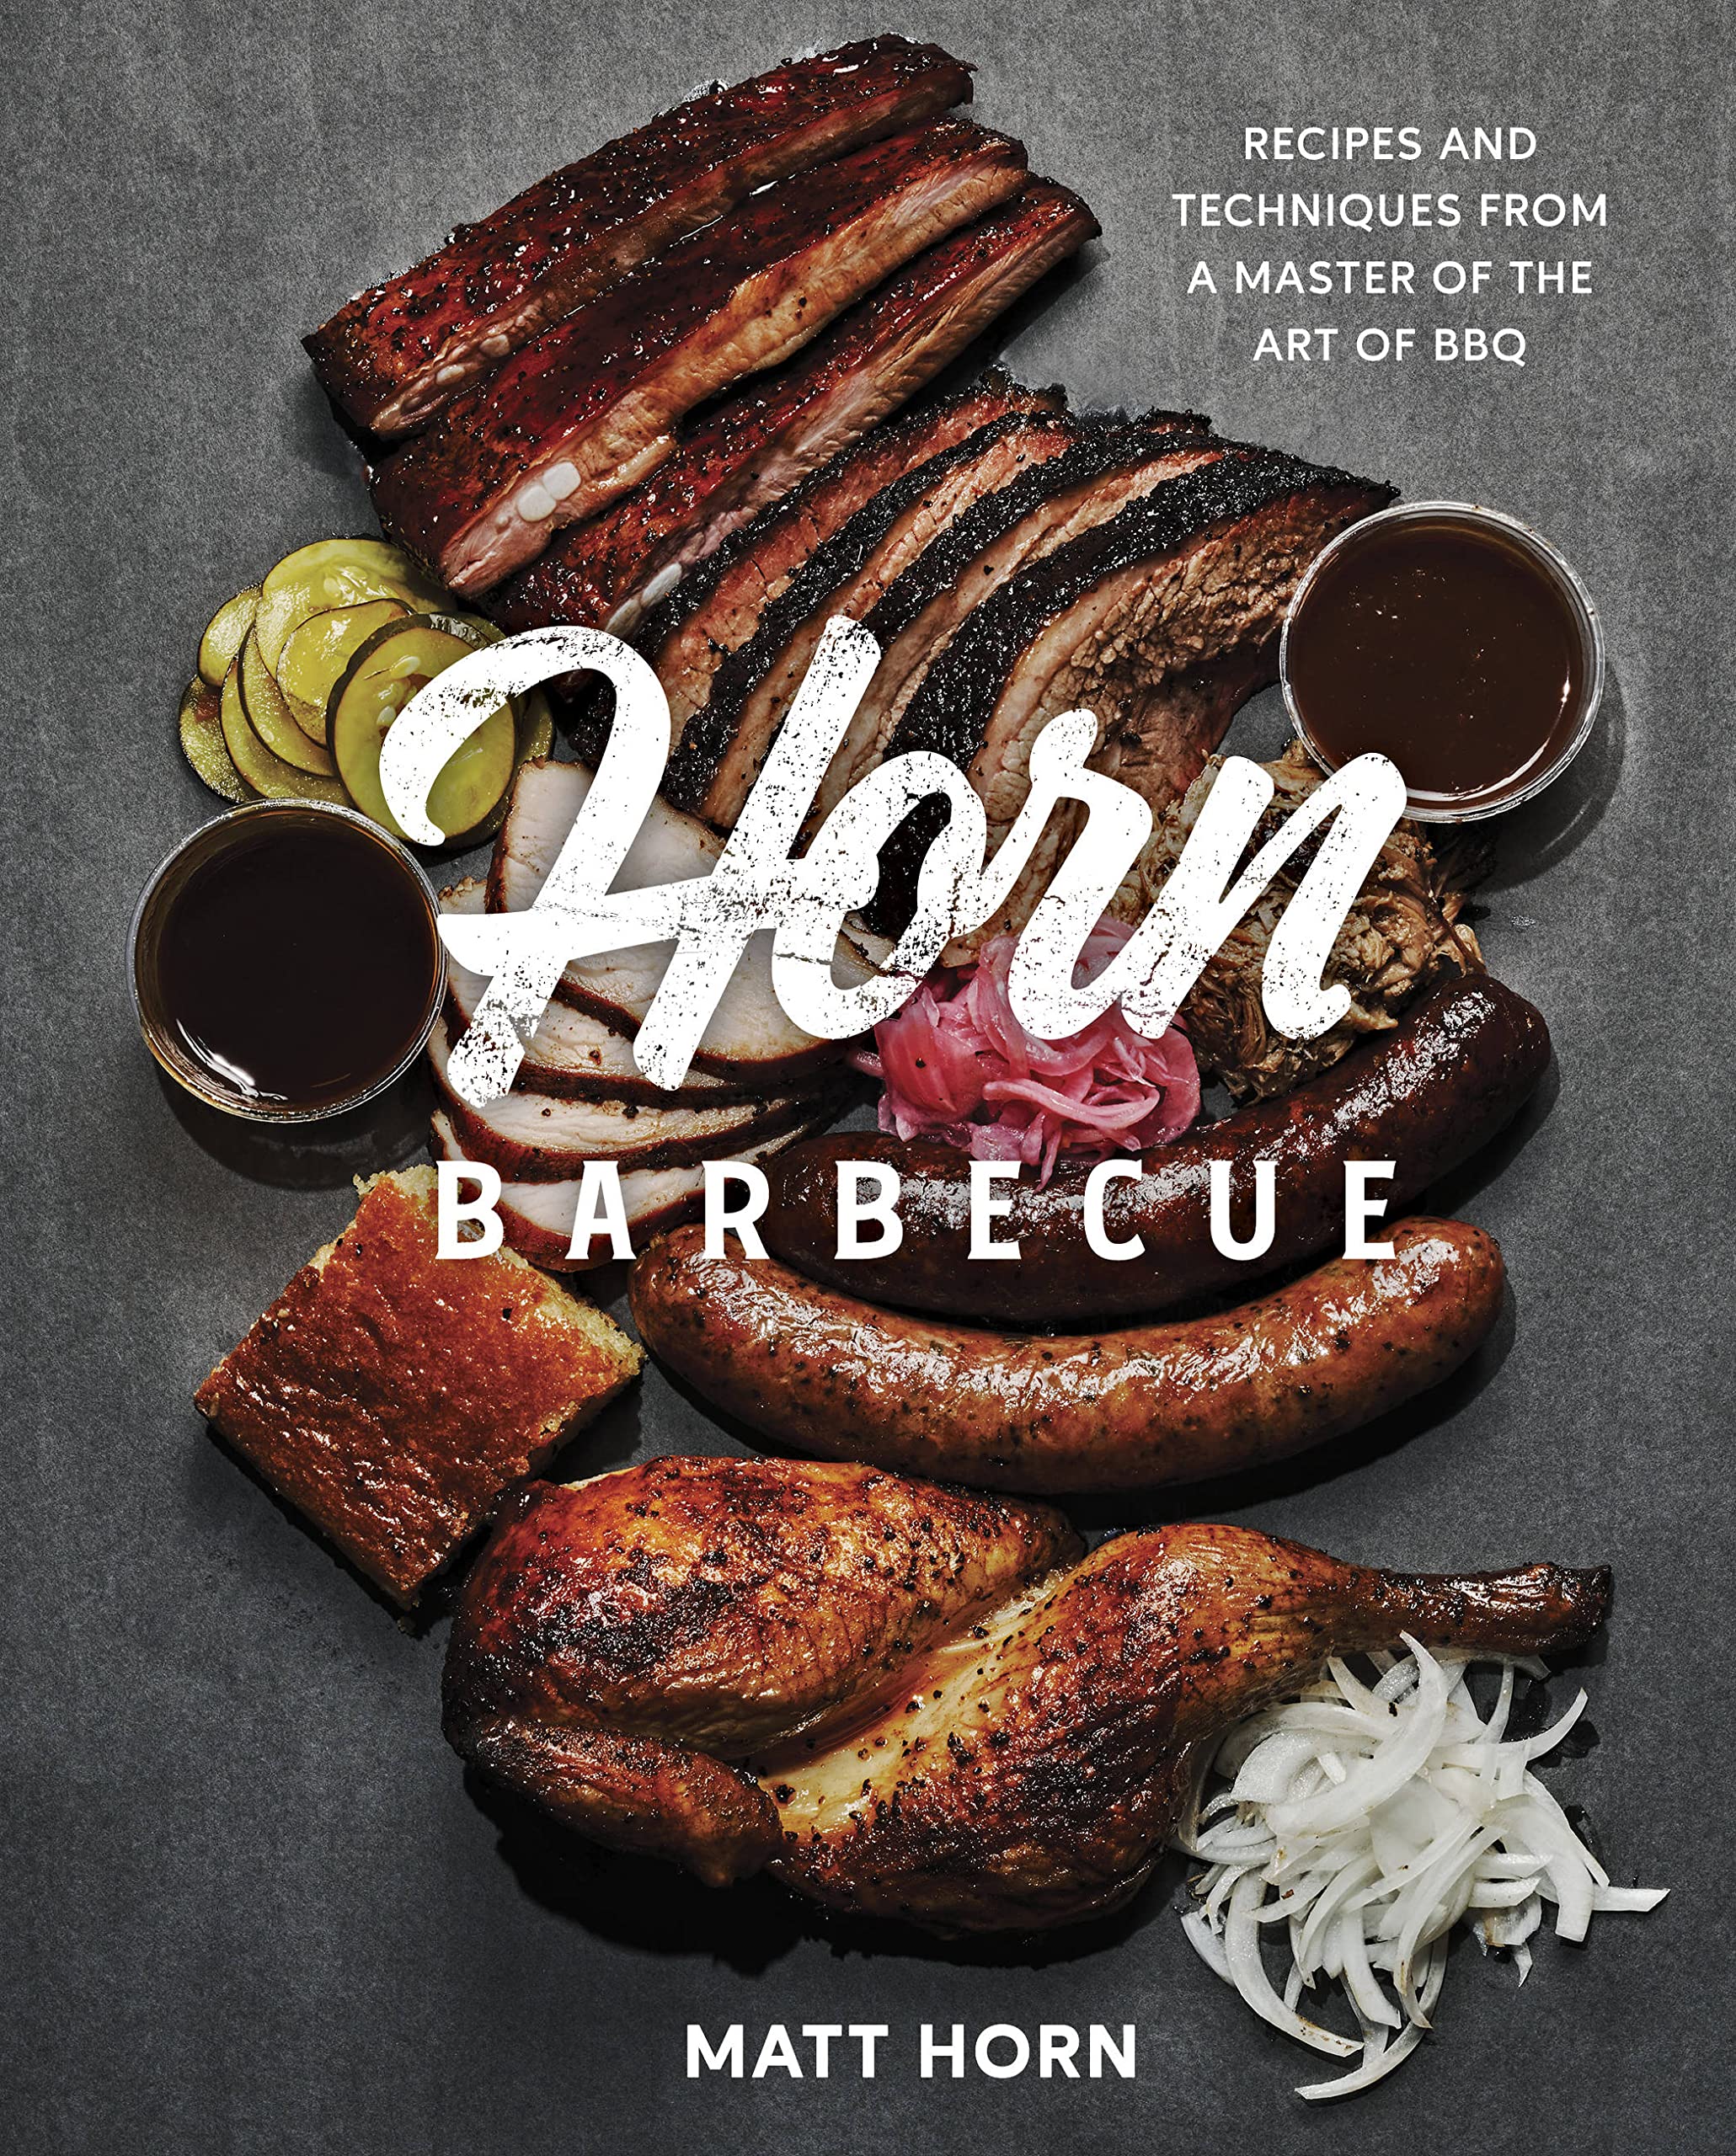 Horn Barbecue: Recipes and Techniques from a Master of the Art of BBQ (Matt Horn)